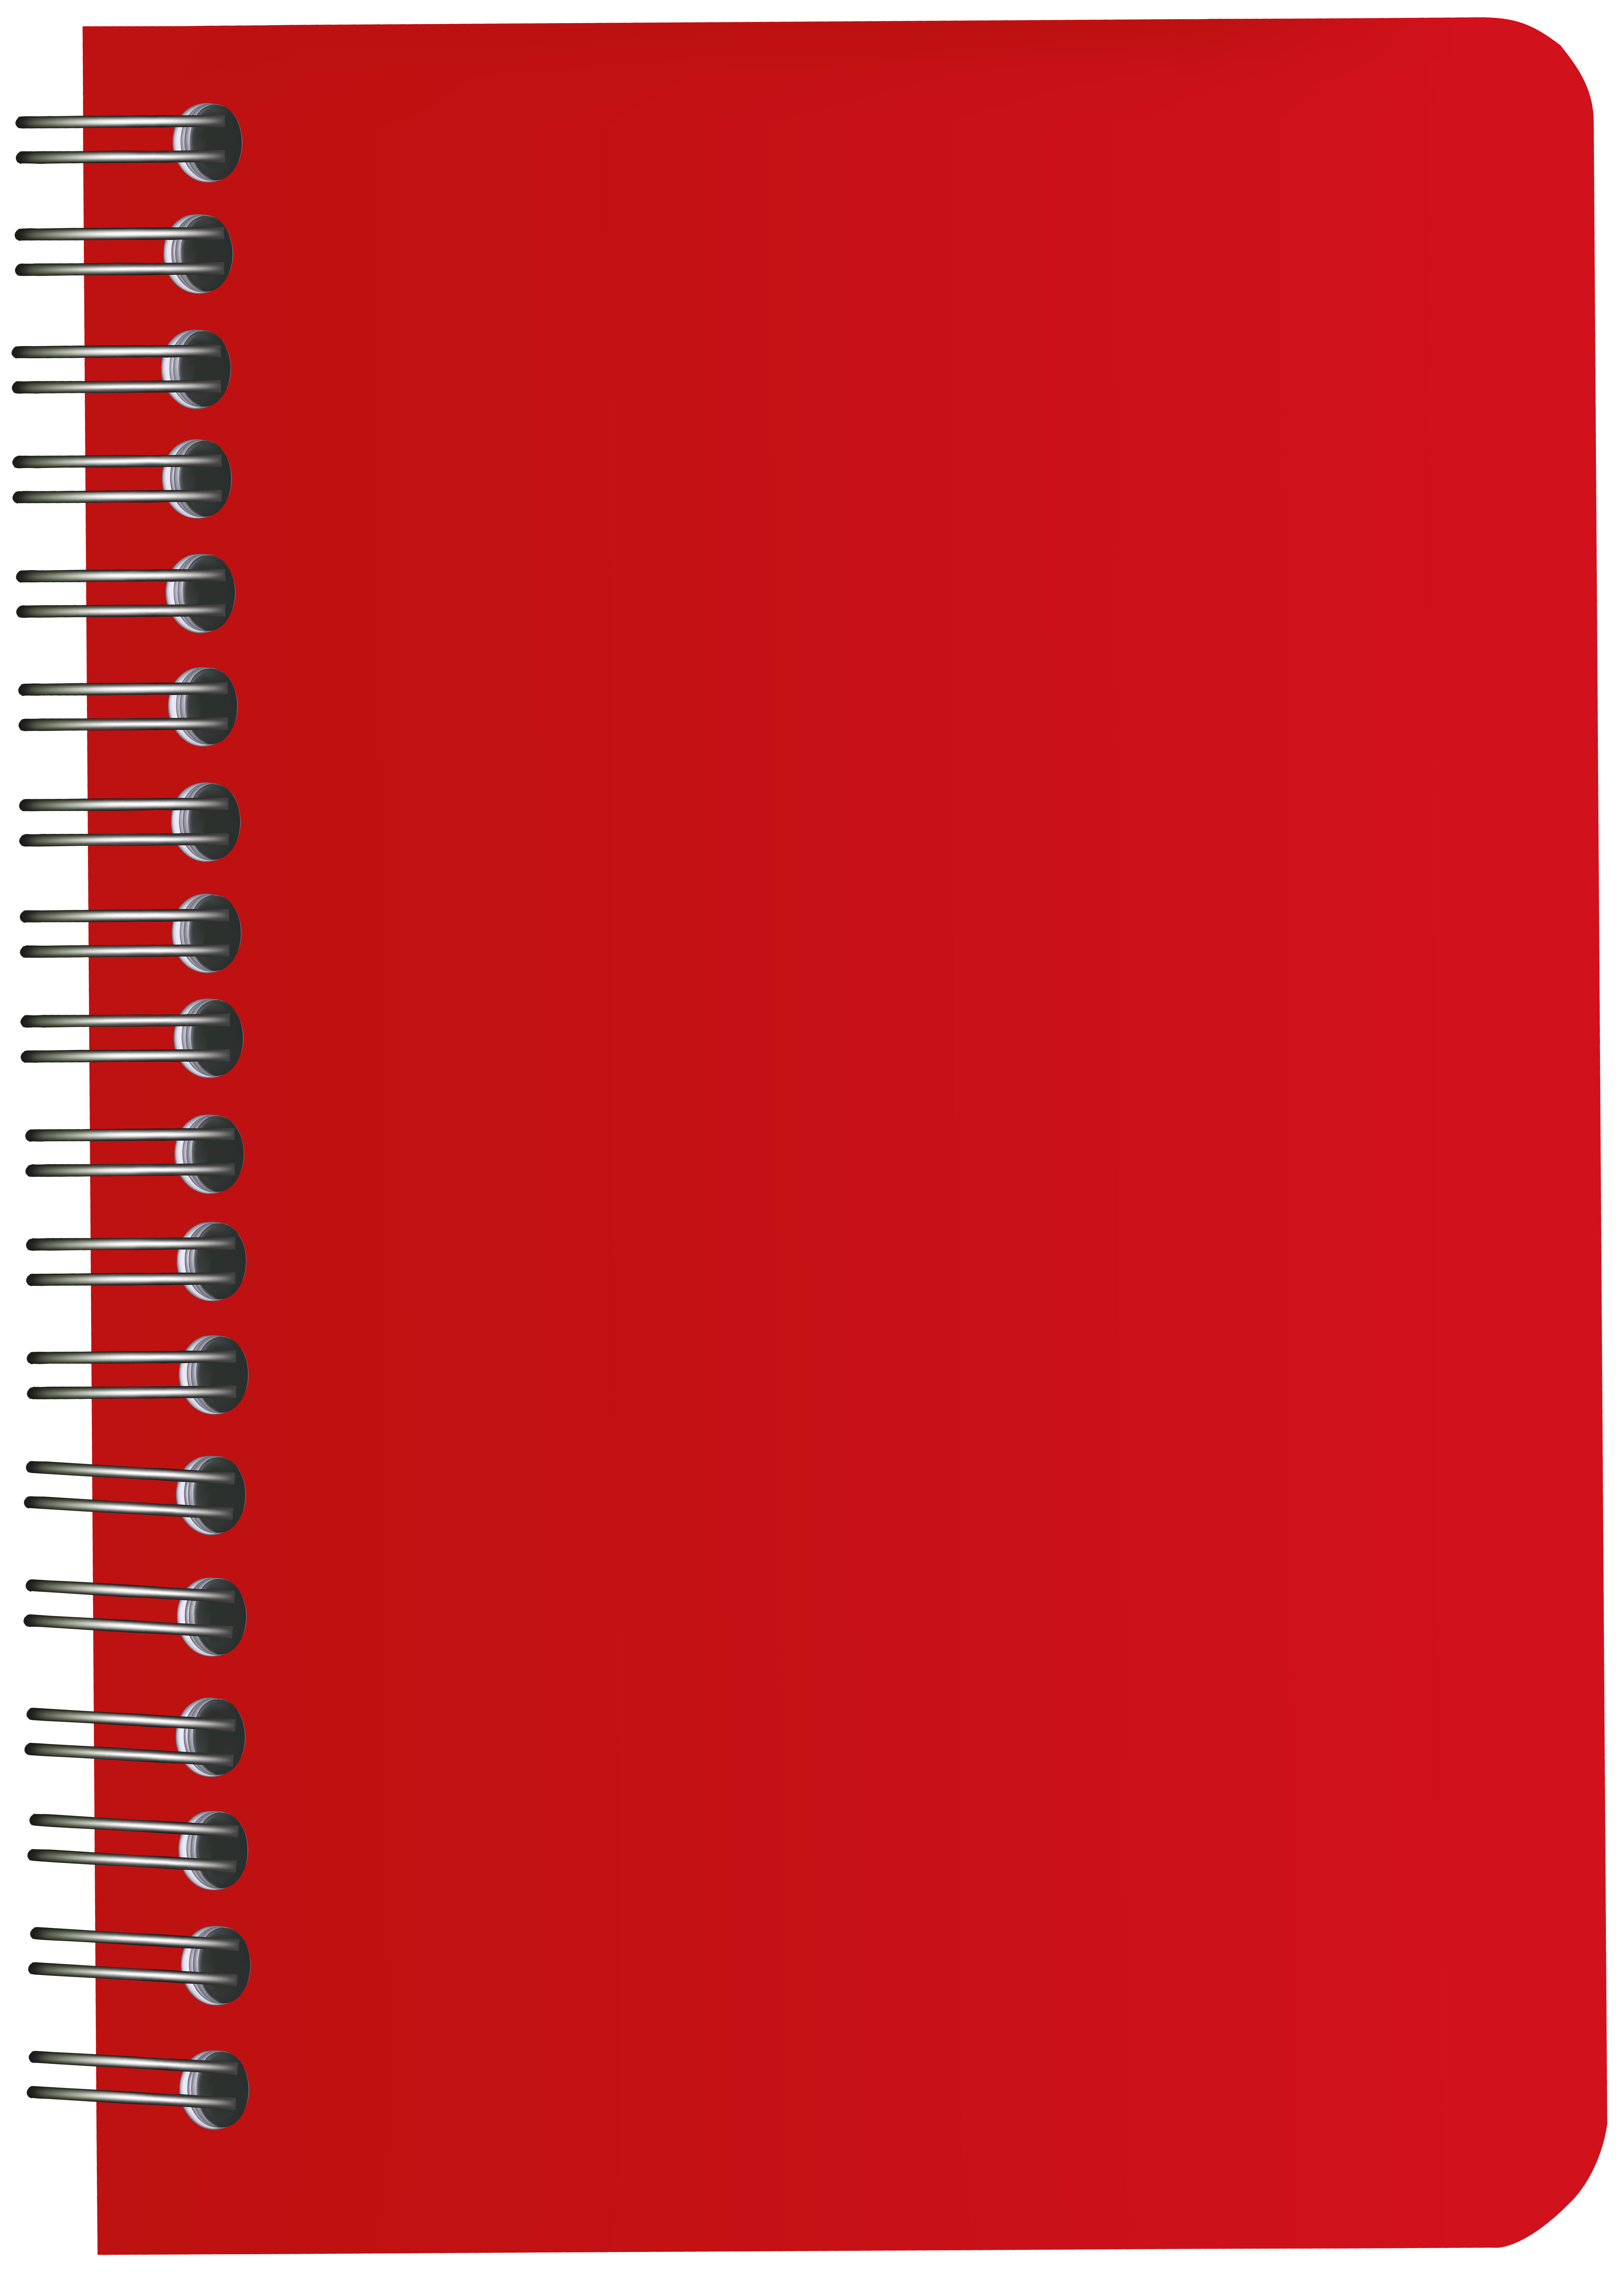 Red Notebook PNG Clip Art Image.